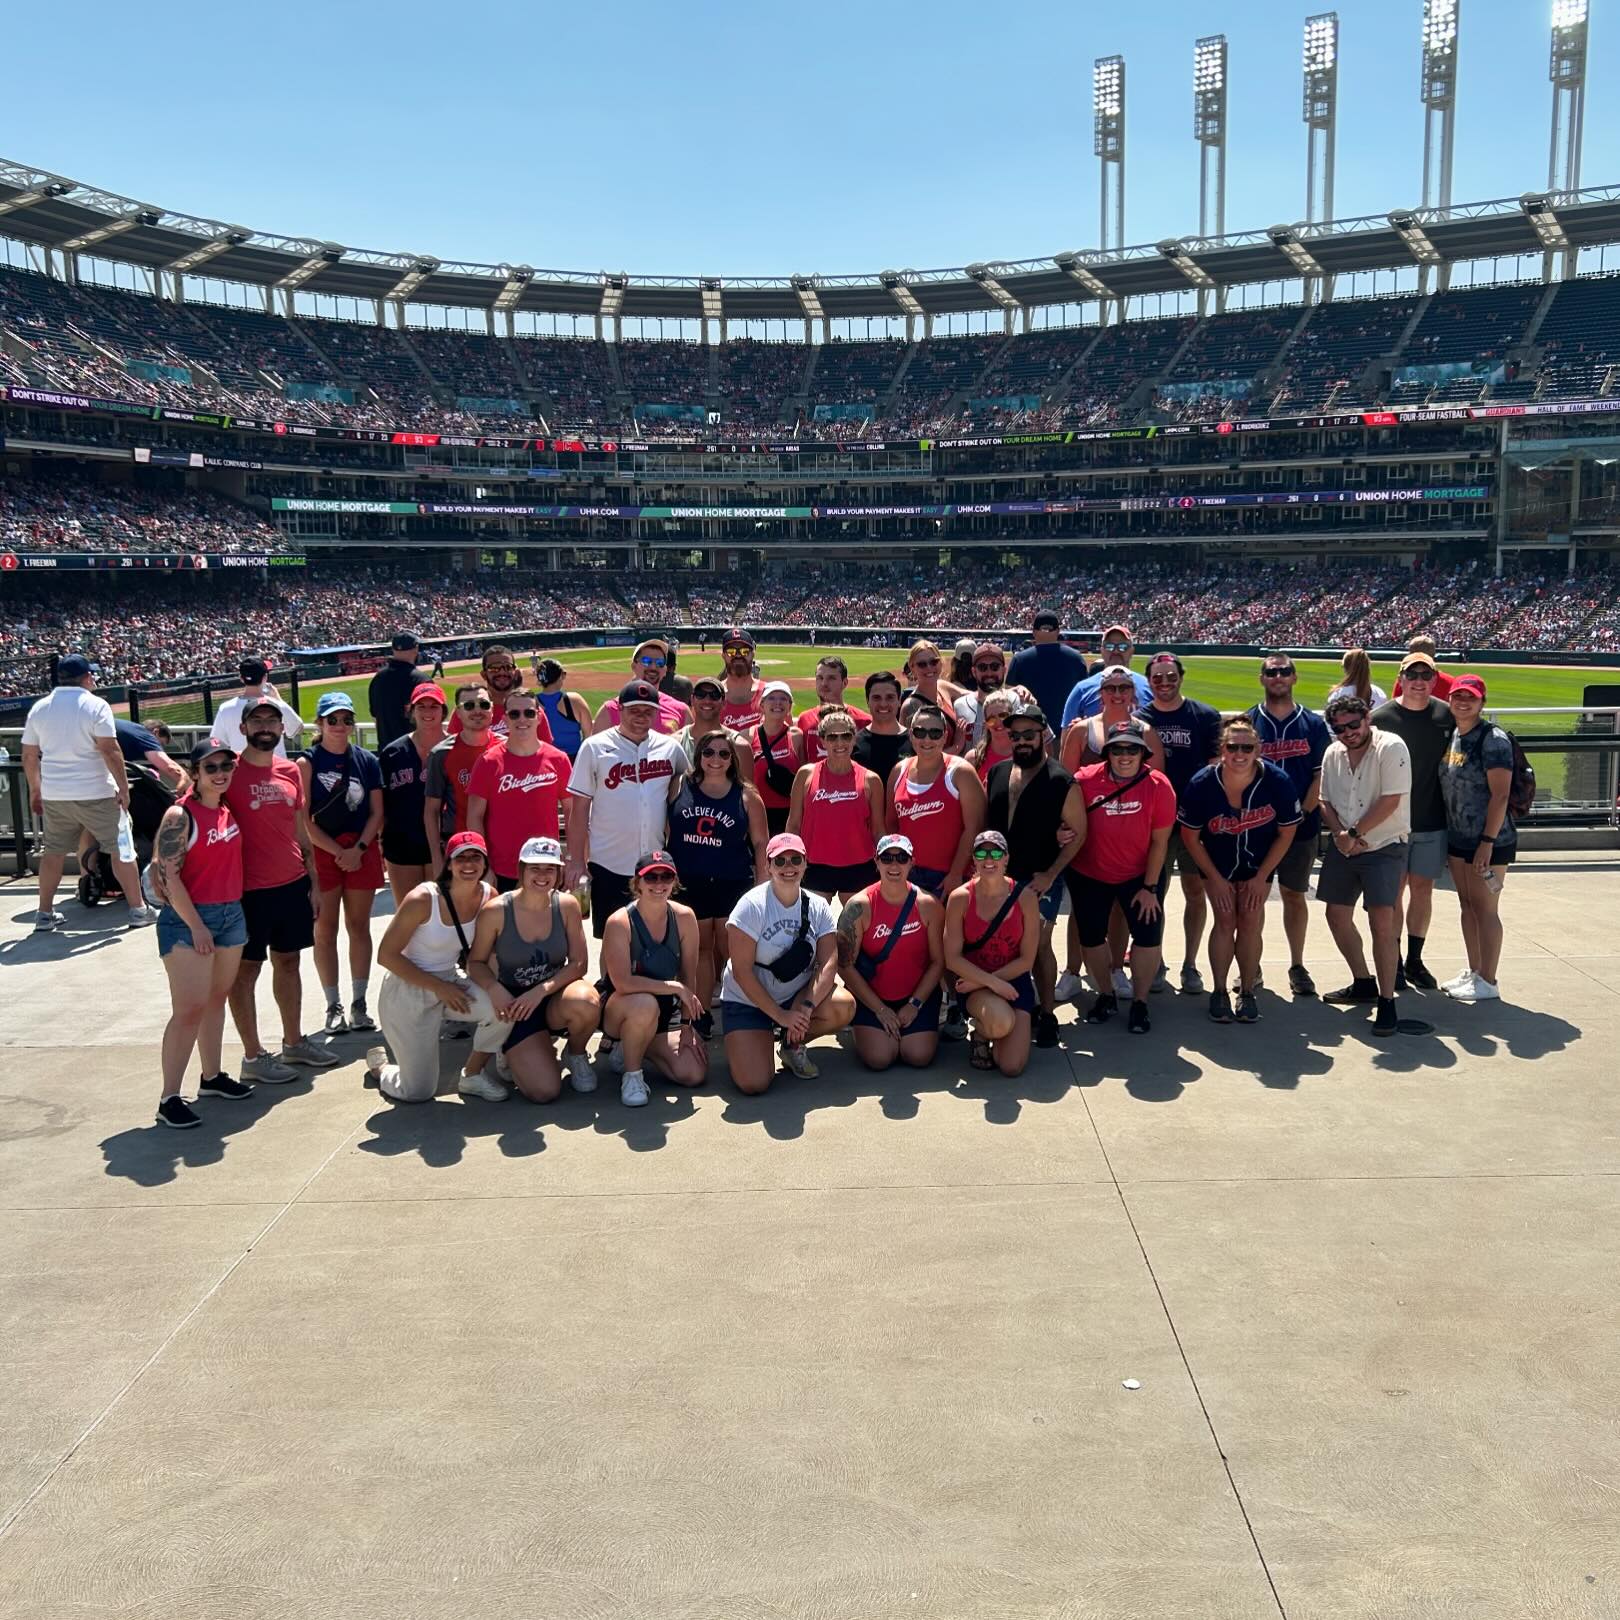 The beginning of the MLB season is an exciting time! Reminds us the warm weather is coming and of course Birdtown Strength Bike to the Ballpark ❤️

 #BirdtownStrength #BirdtownStrong #FunctionalFitness #BeBetter #RedefiningStrength #TeamWorkMakesTheDreamWork #WeAreBirdtown #Lakewood #Ohio #LakewoodOhio